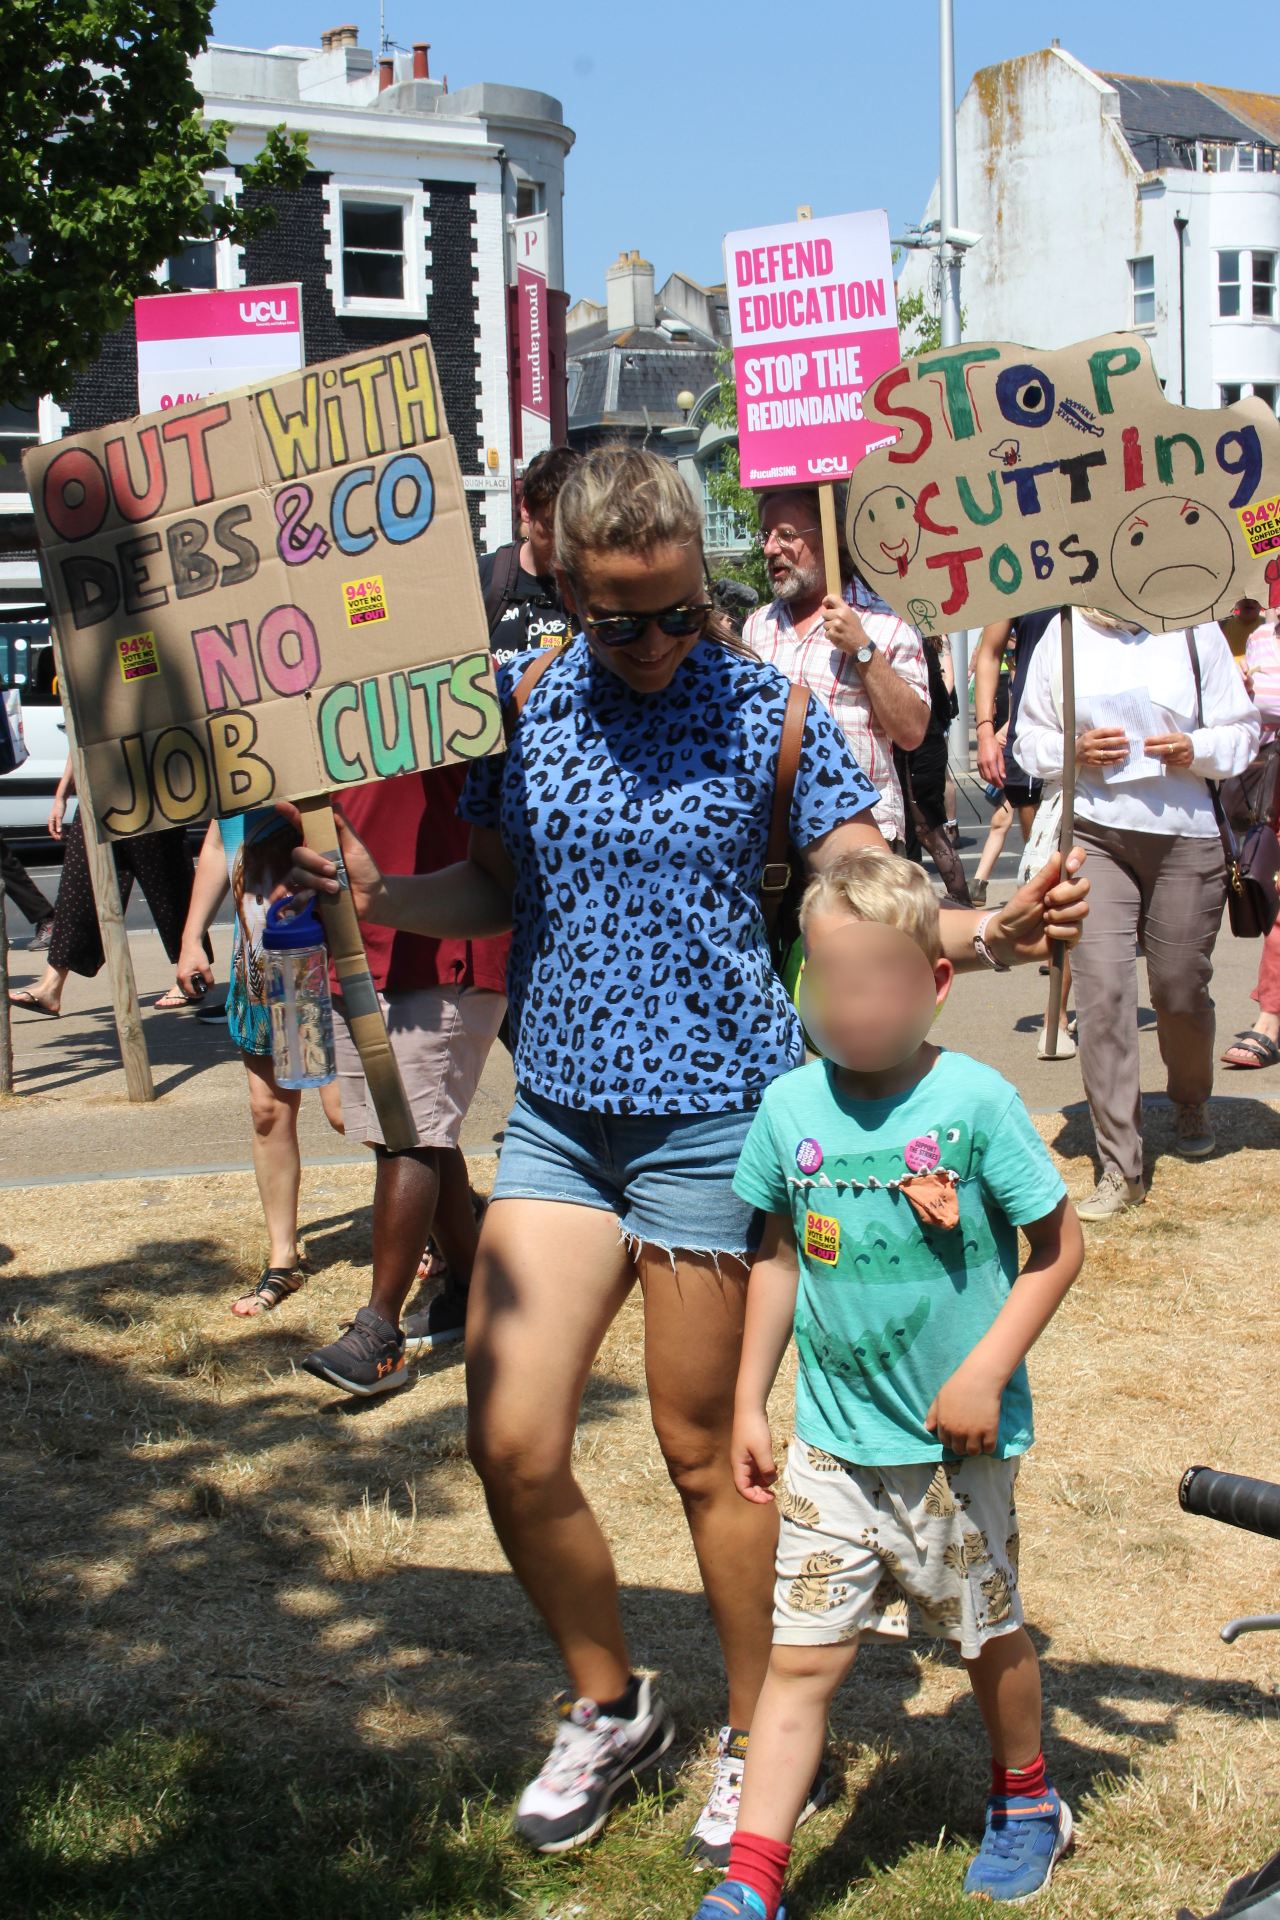 Mum and young son at march. Mum holding placard "Out with Debs & co. No job cuts"